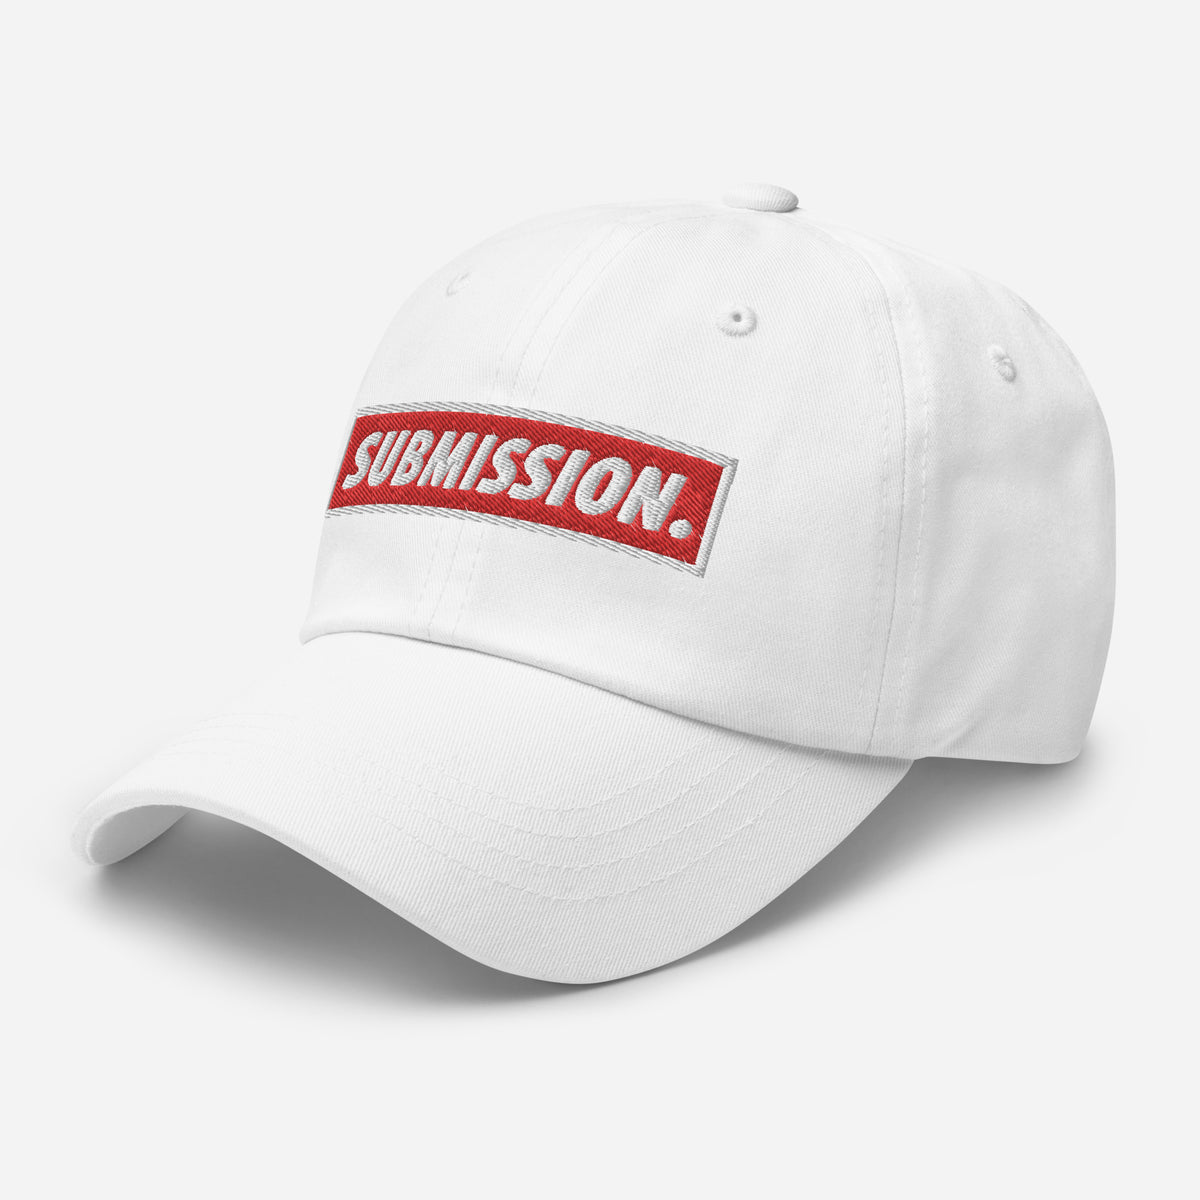 BJJ Text Submission Red Classic Dad Hat